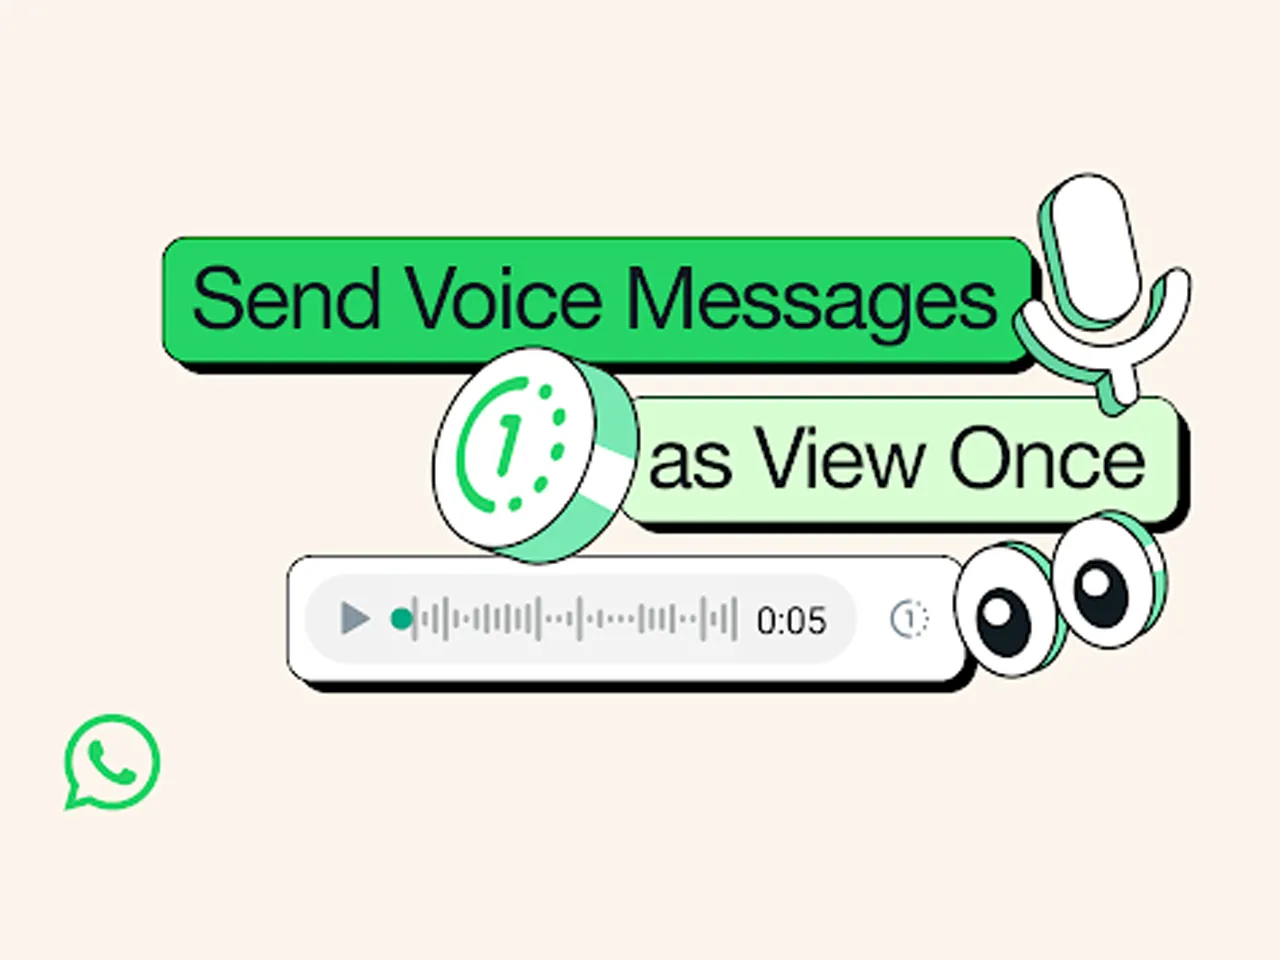 WhatsApp adds View Once feature to voice messages